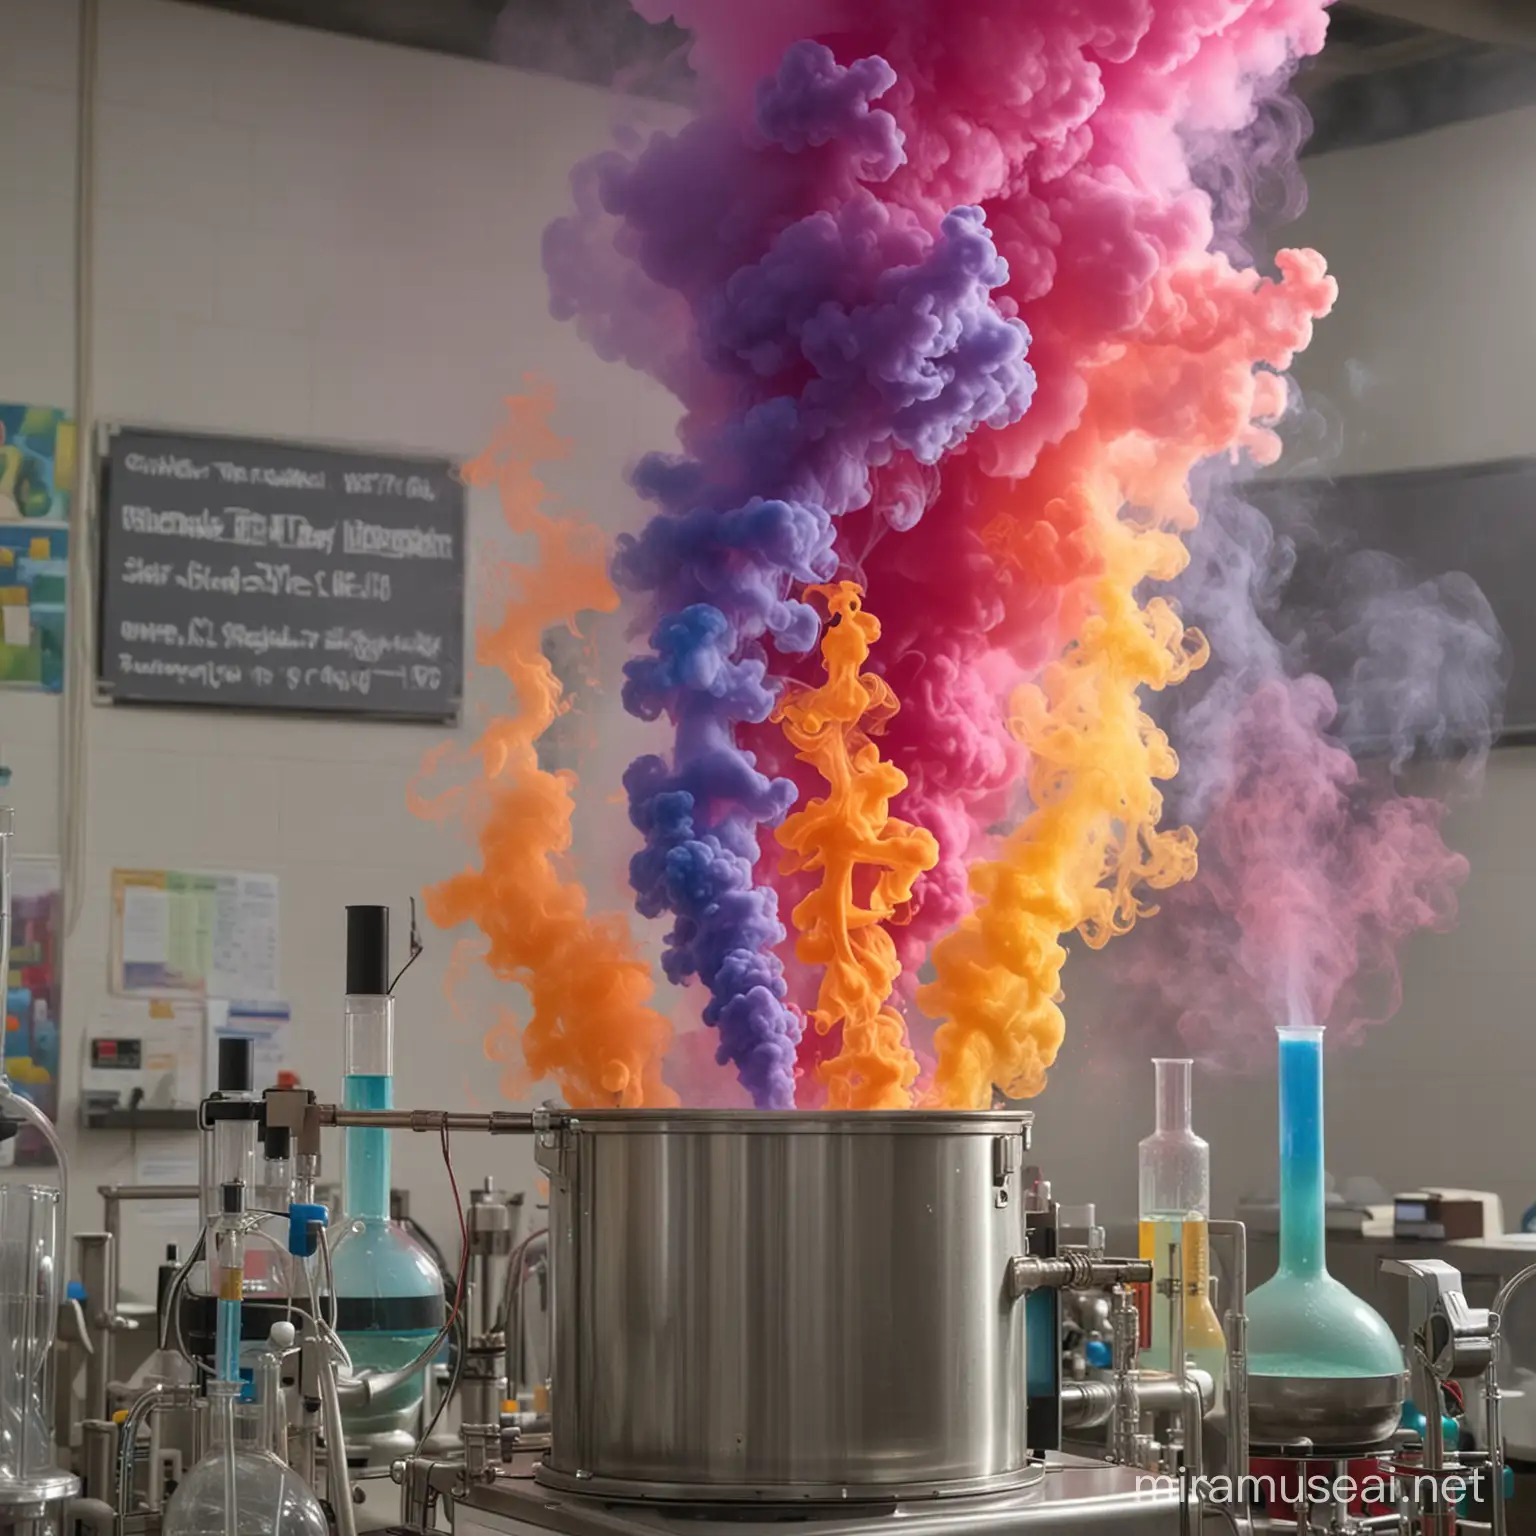 brightly colored smoke swirling through chemistry equipment.